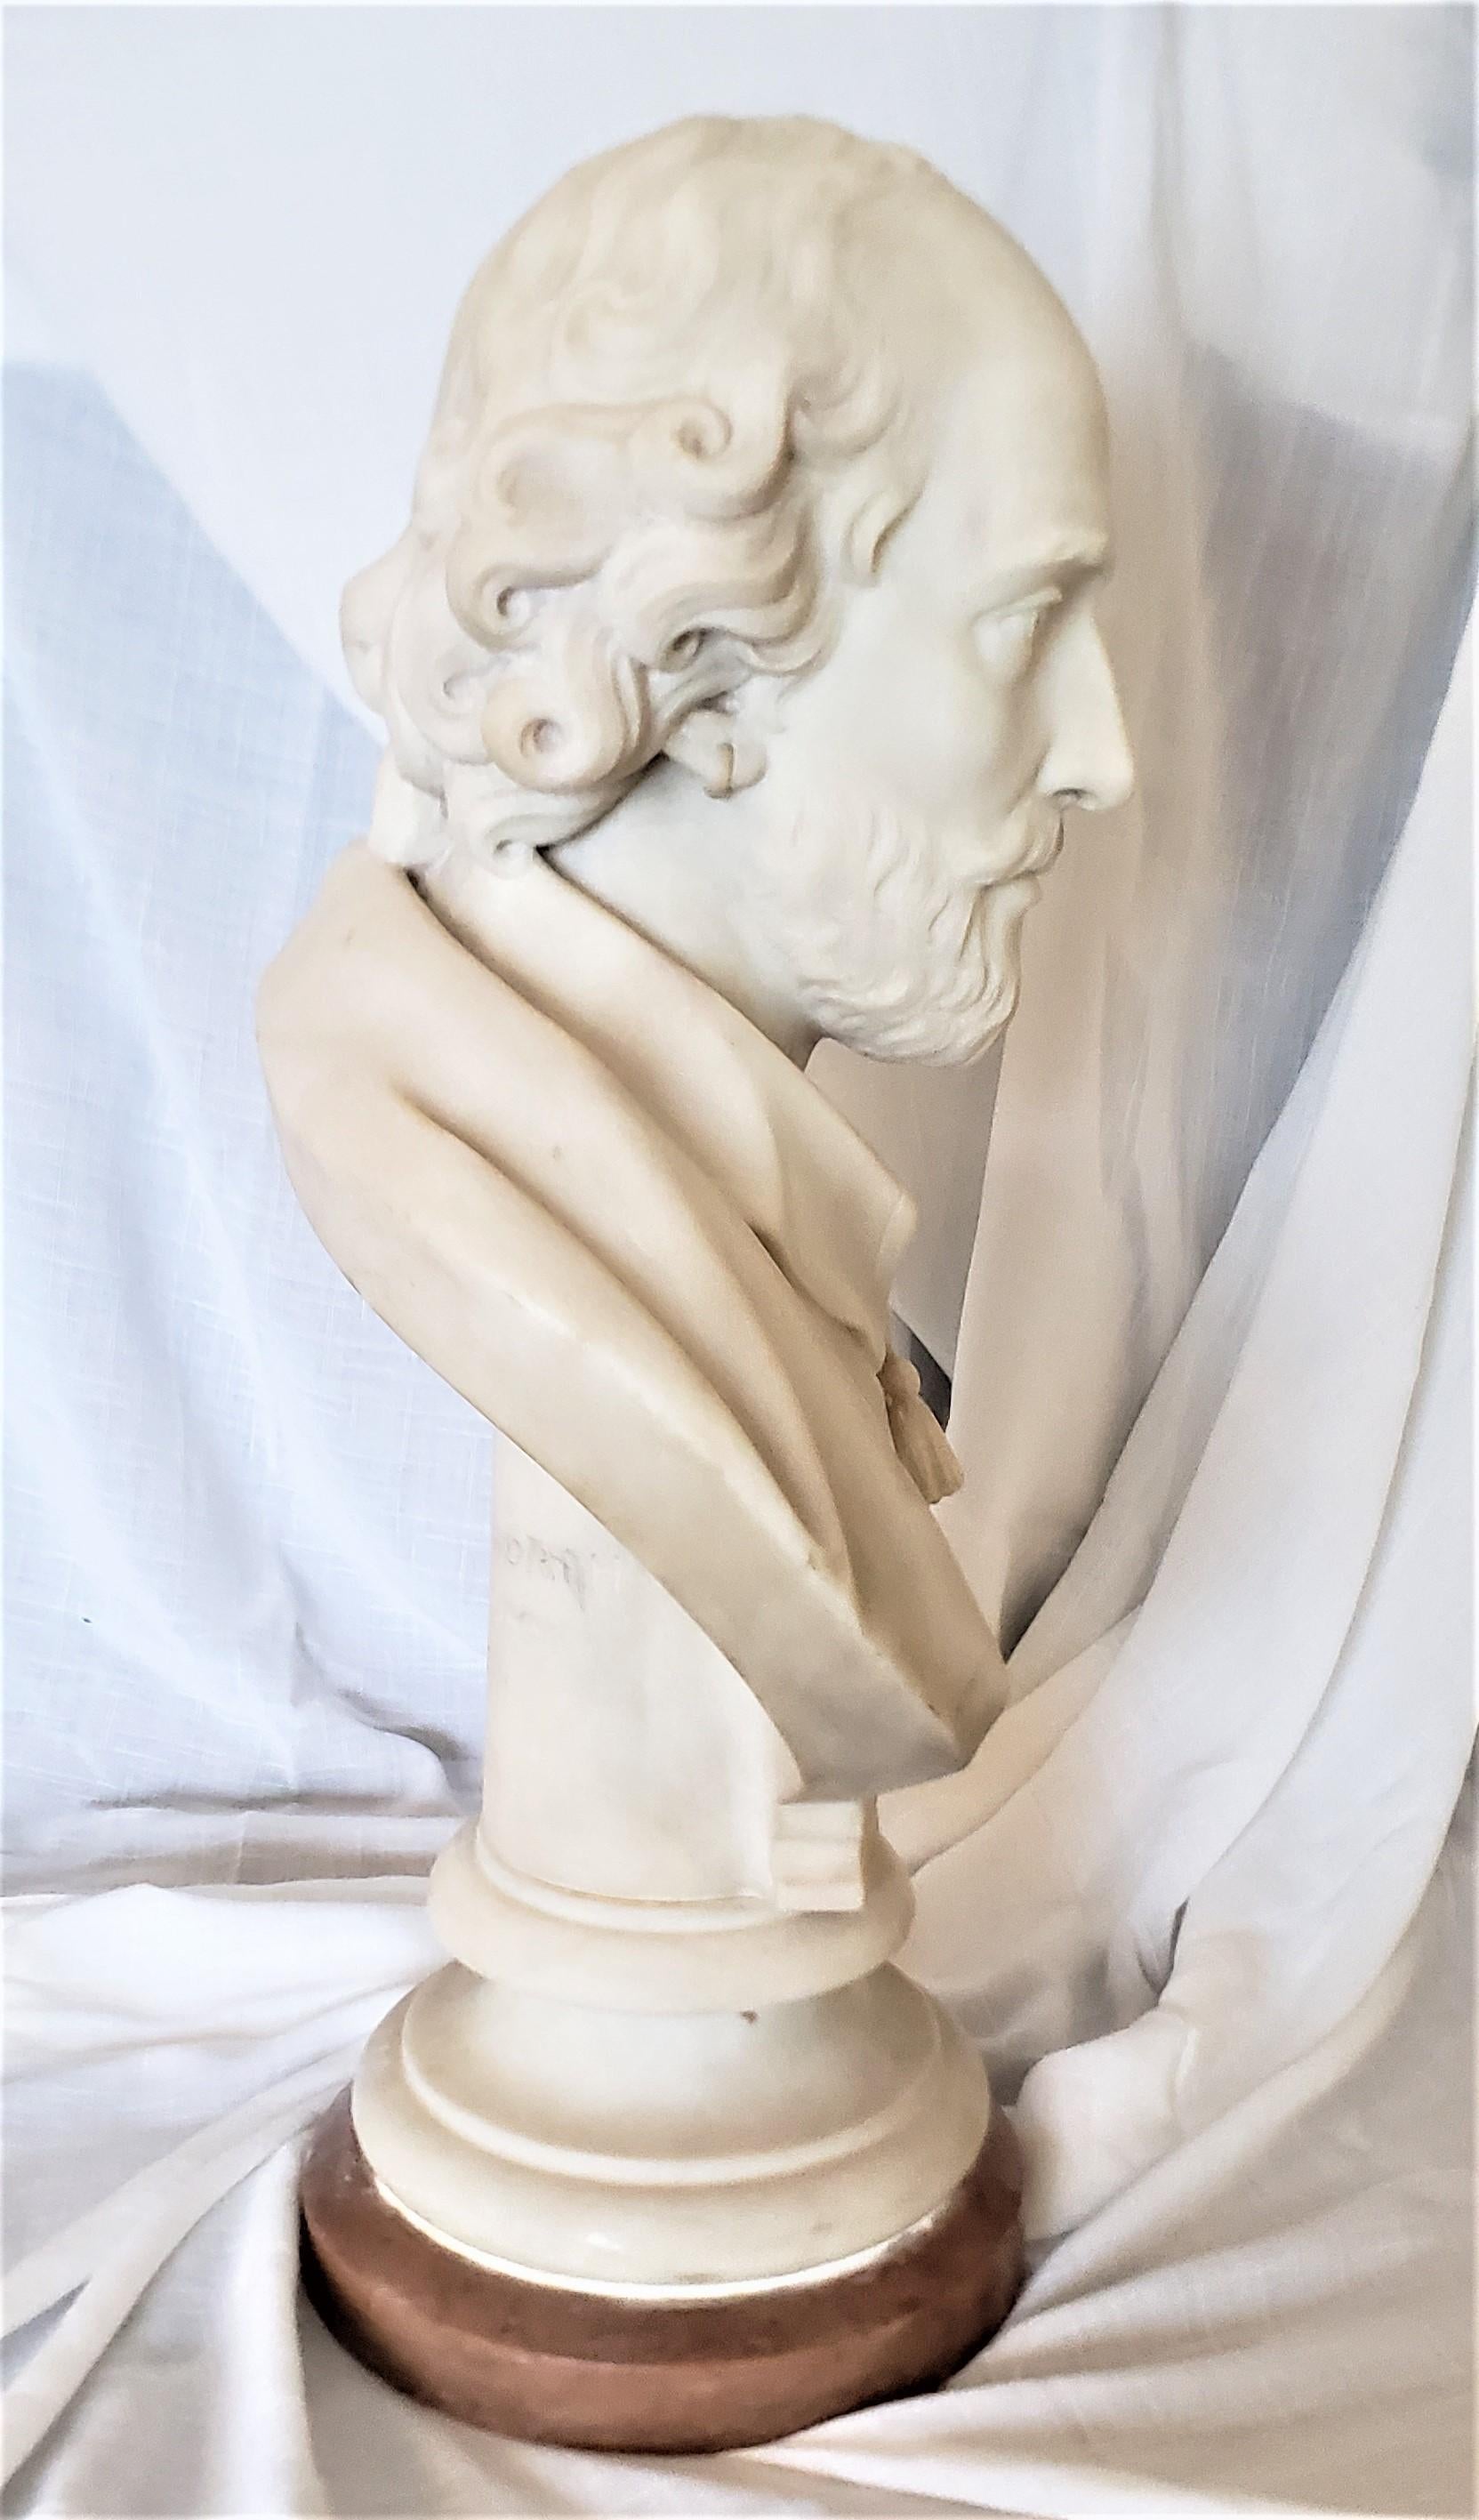 Large Antique English Signed C. Papworth Hand-Carved Marble Bust or Sculpture For Sale 2